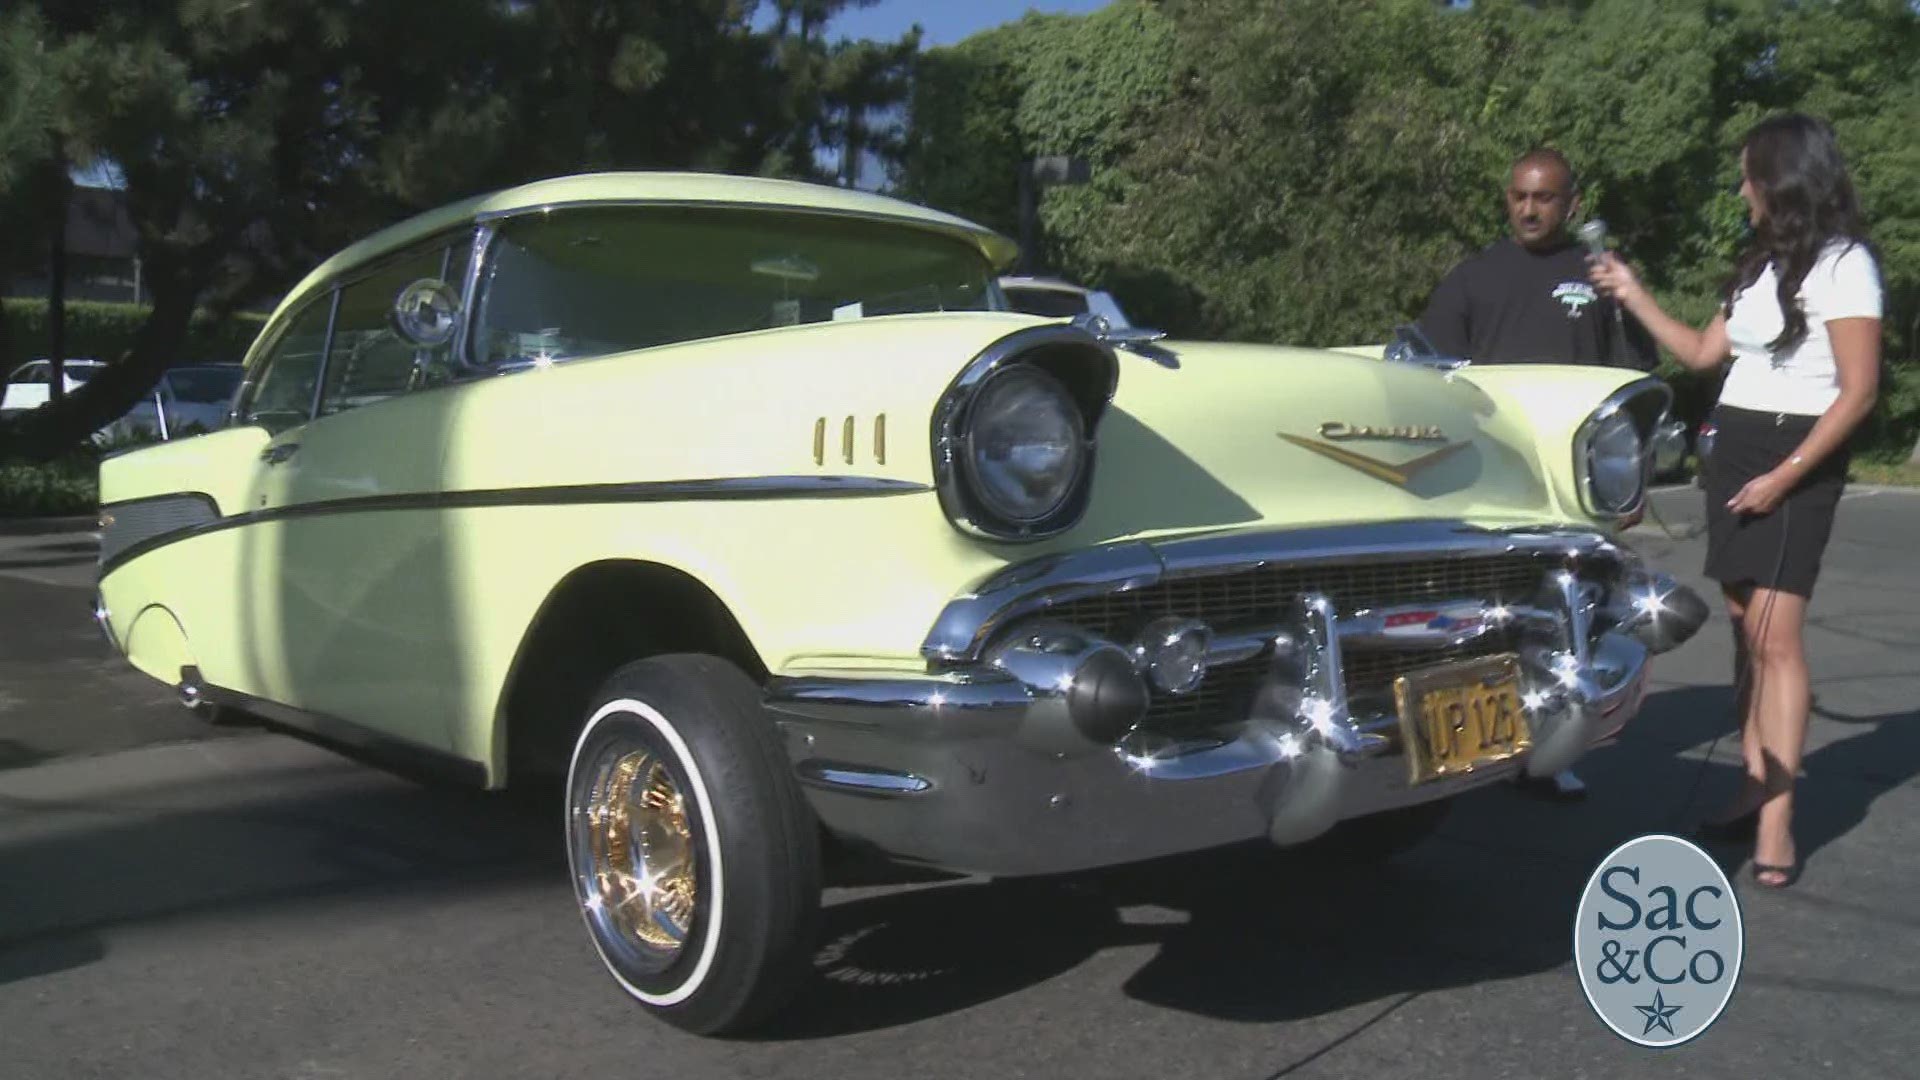 Aubrey Aquino chatted with local community members about why it’s important to embrace and learn about other cultures. They also brought over some awesome classic cars!